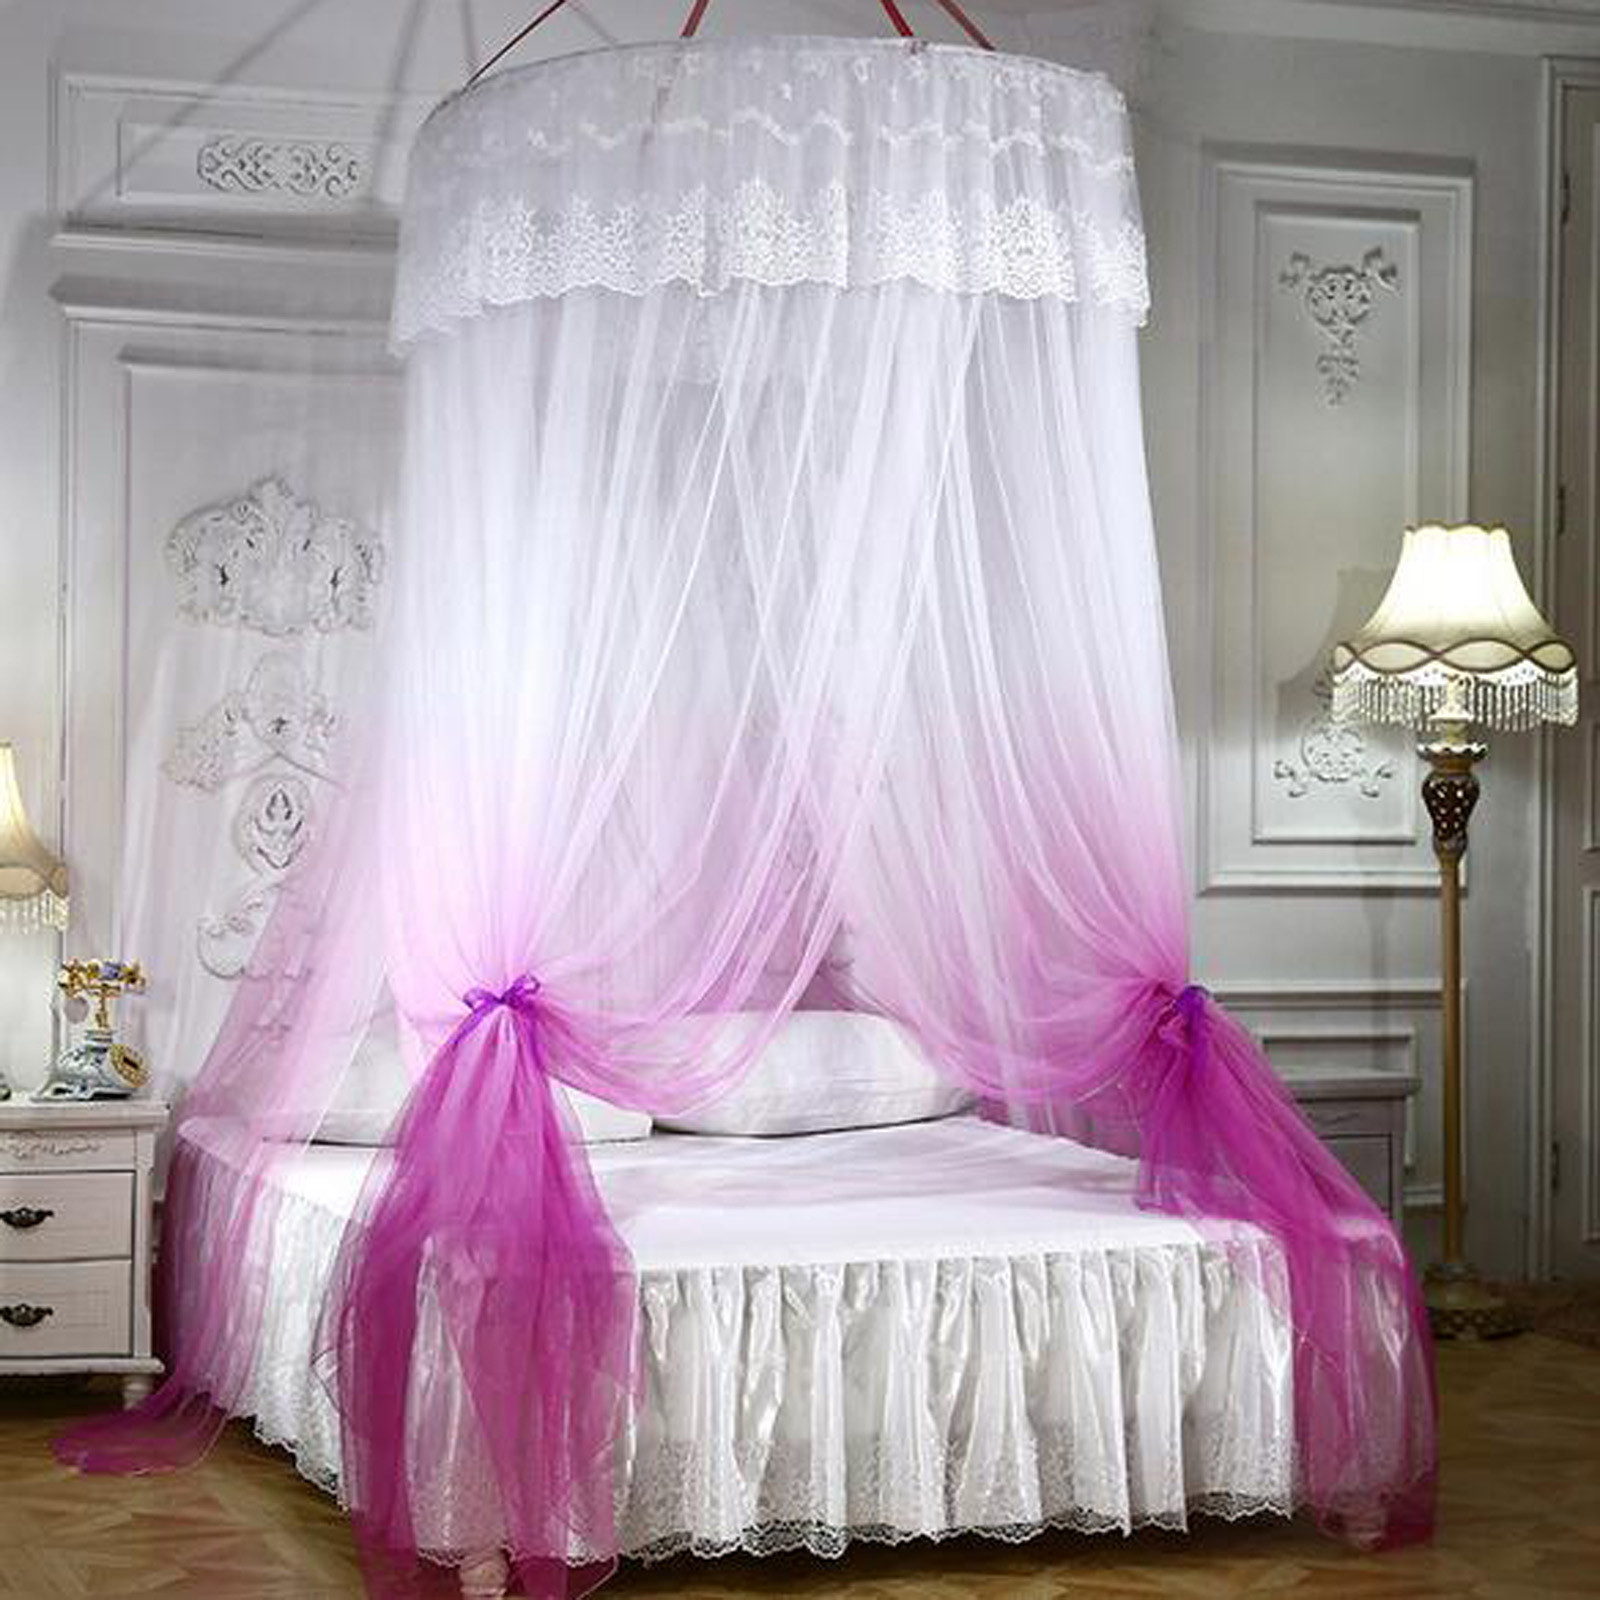 Bed Canopy Double Colors Hung Mosquito Net Princess Bed Tent Curtain Foldable Canopy On The Bed Elegant Fairy Lace Dossels #T2G